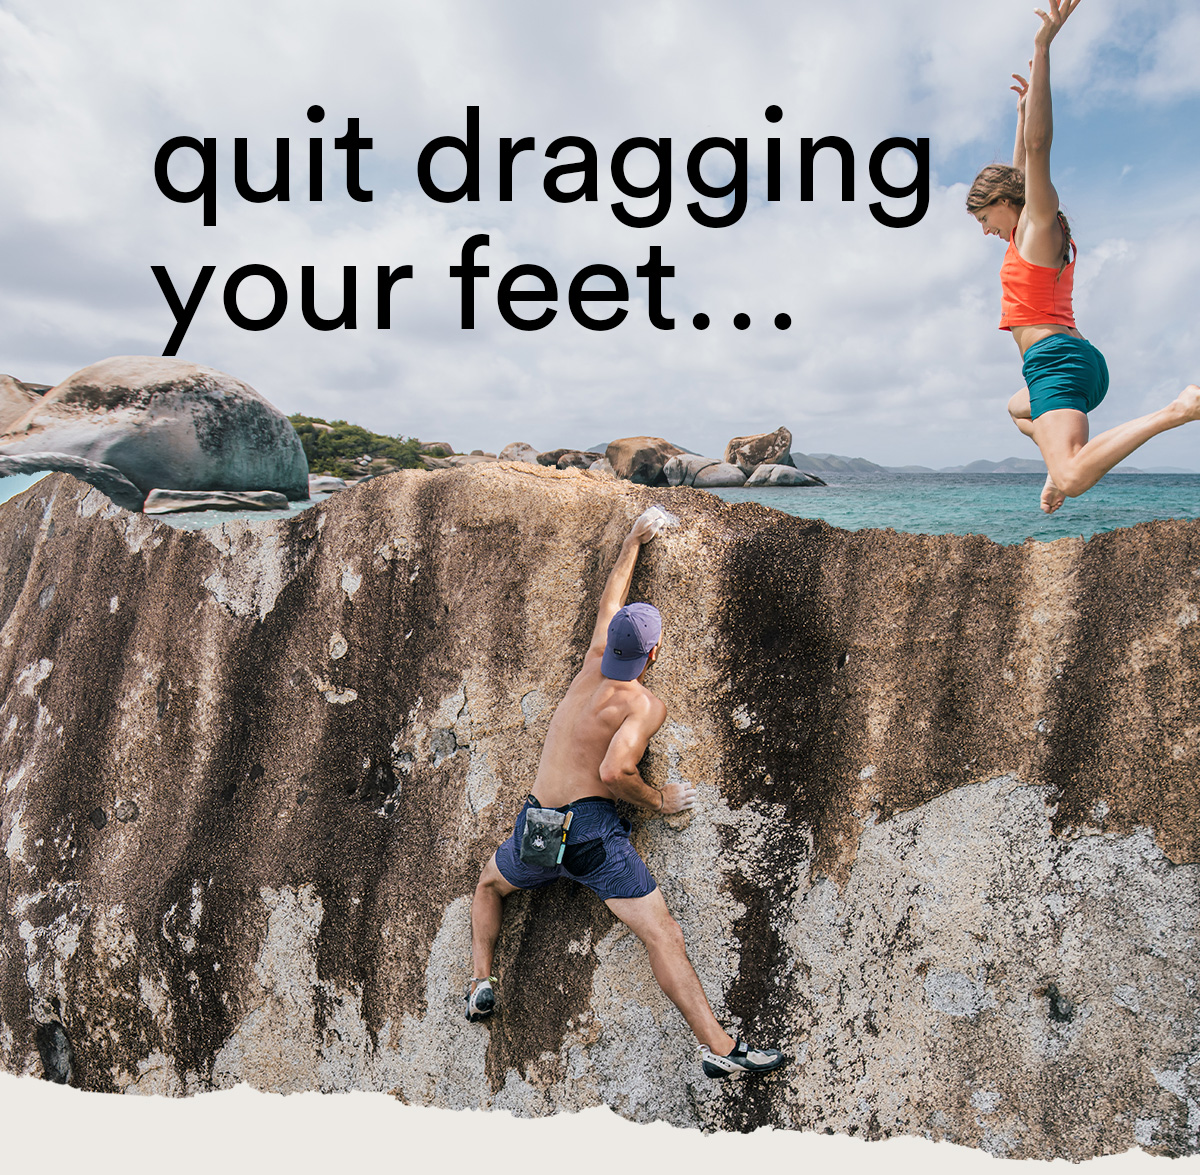 a man bouldering a wall/ a girl jumping into water/ "Quit dragging your feet..." quit dragging 4 your feet... 